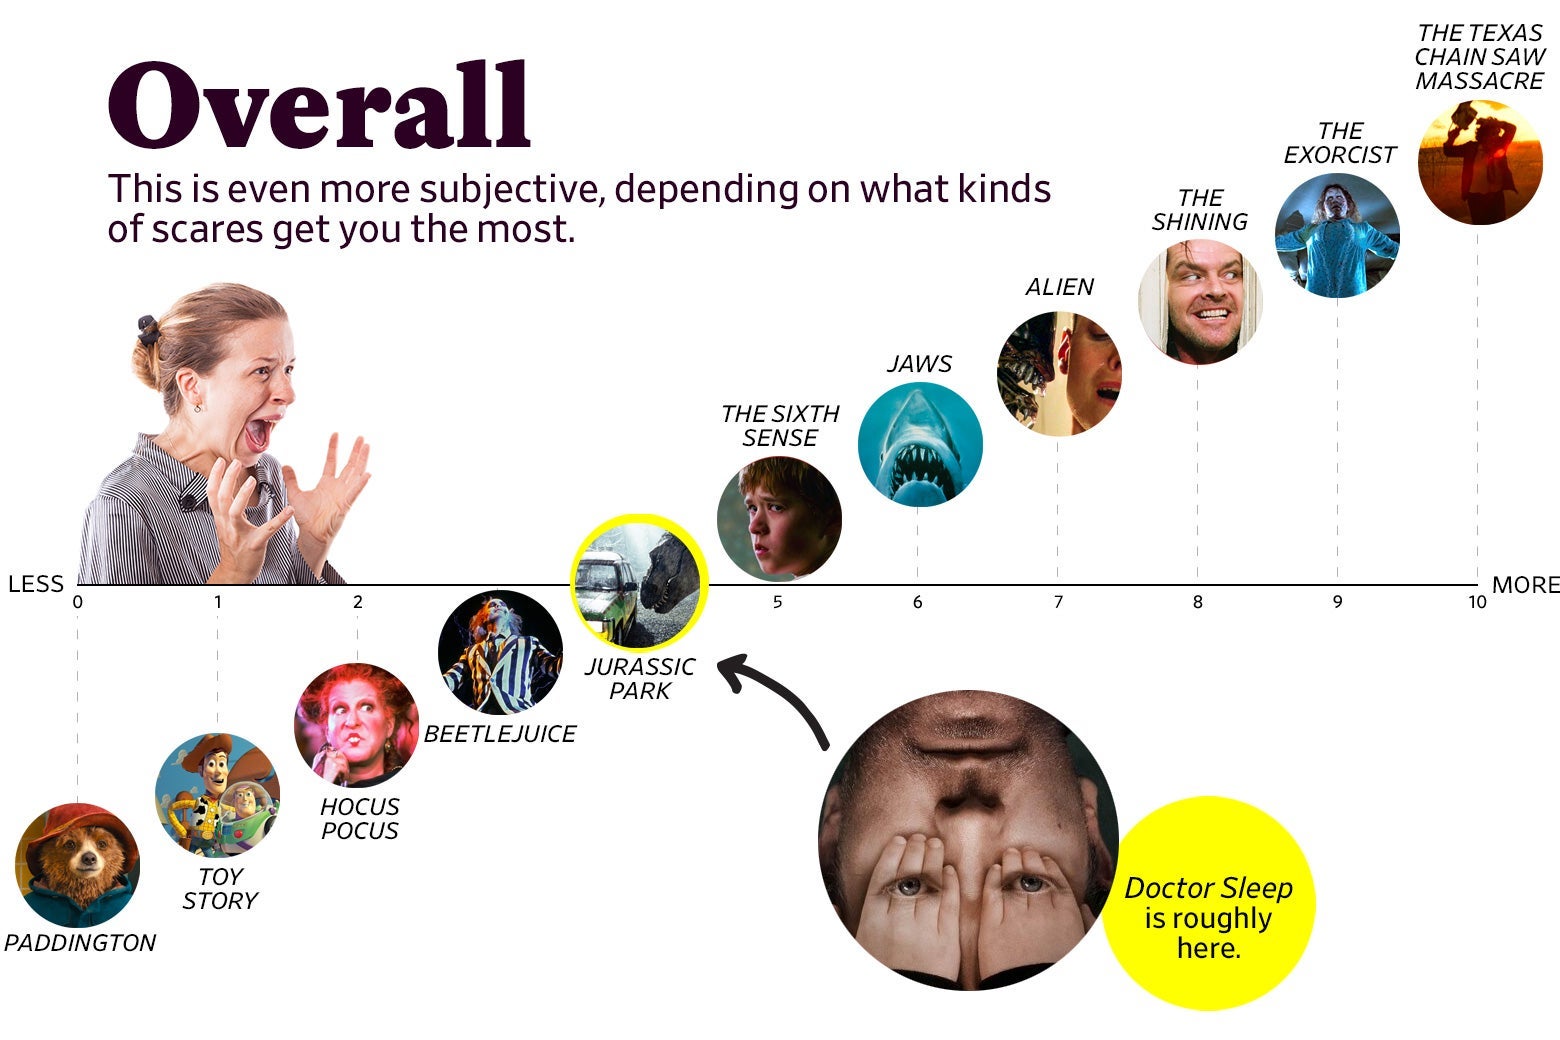 A chart titled “Overall: This is even more subjective, depending on what kinds of scares get you the most” shows that Doctor Sleep ranks as a 4 overall, roughly the same as Jurassic Park, whereas The Shining scored an 8. The scale ranges from Paddington (0) to the original Texas Chain Saw Massacre (10).